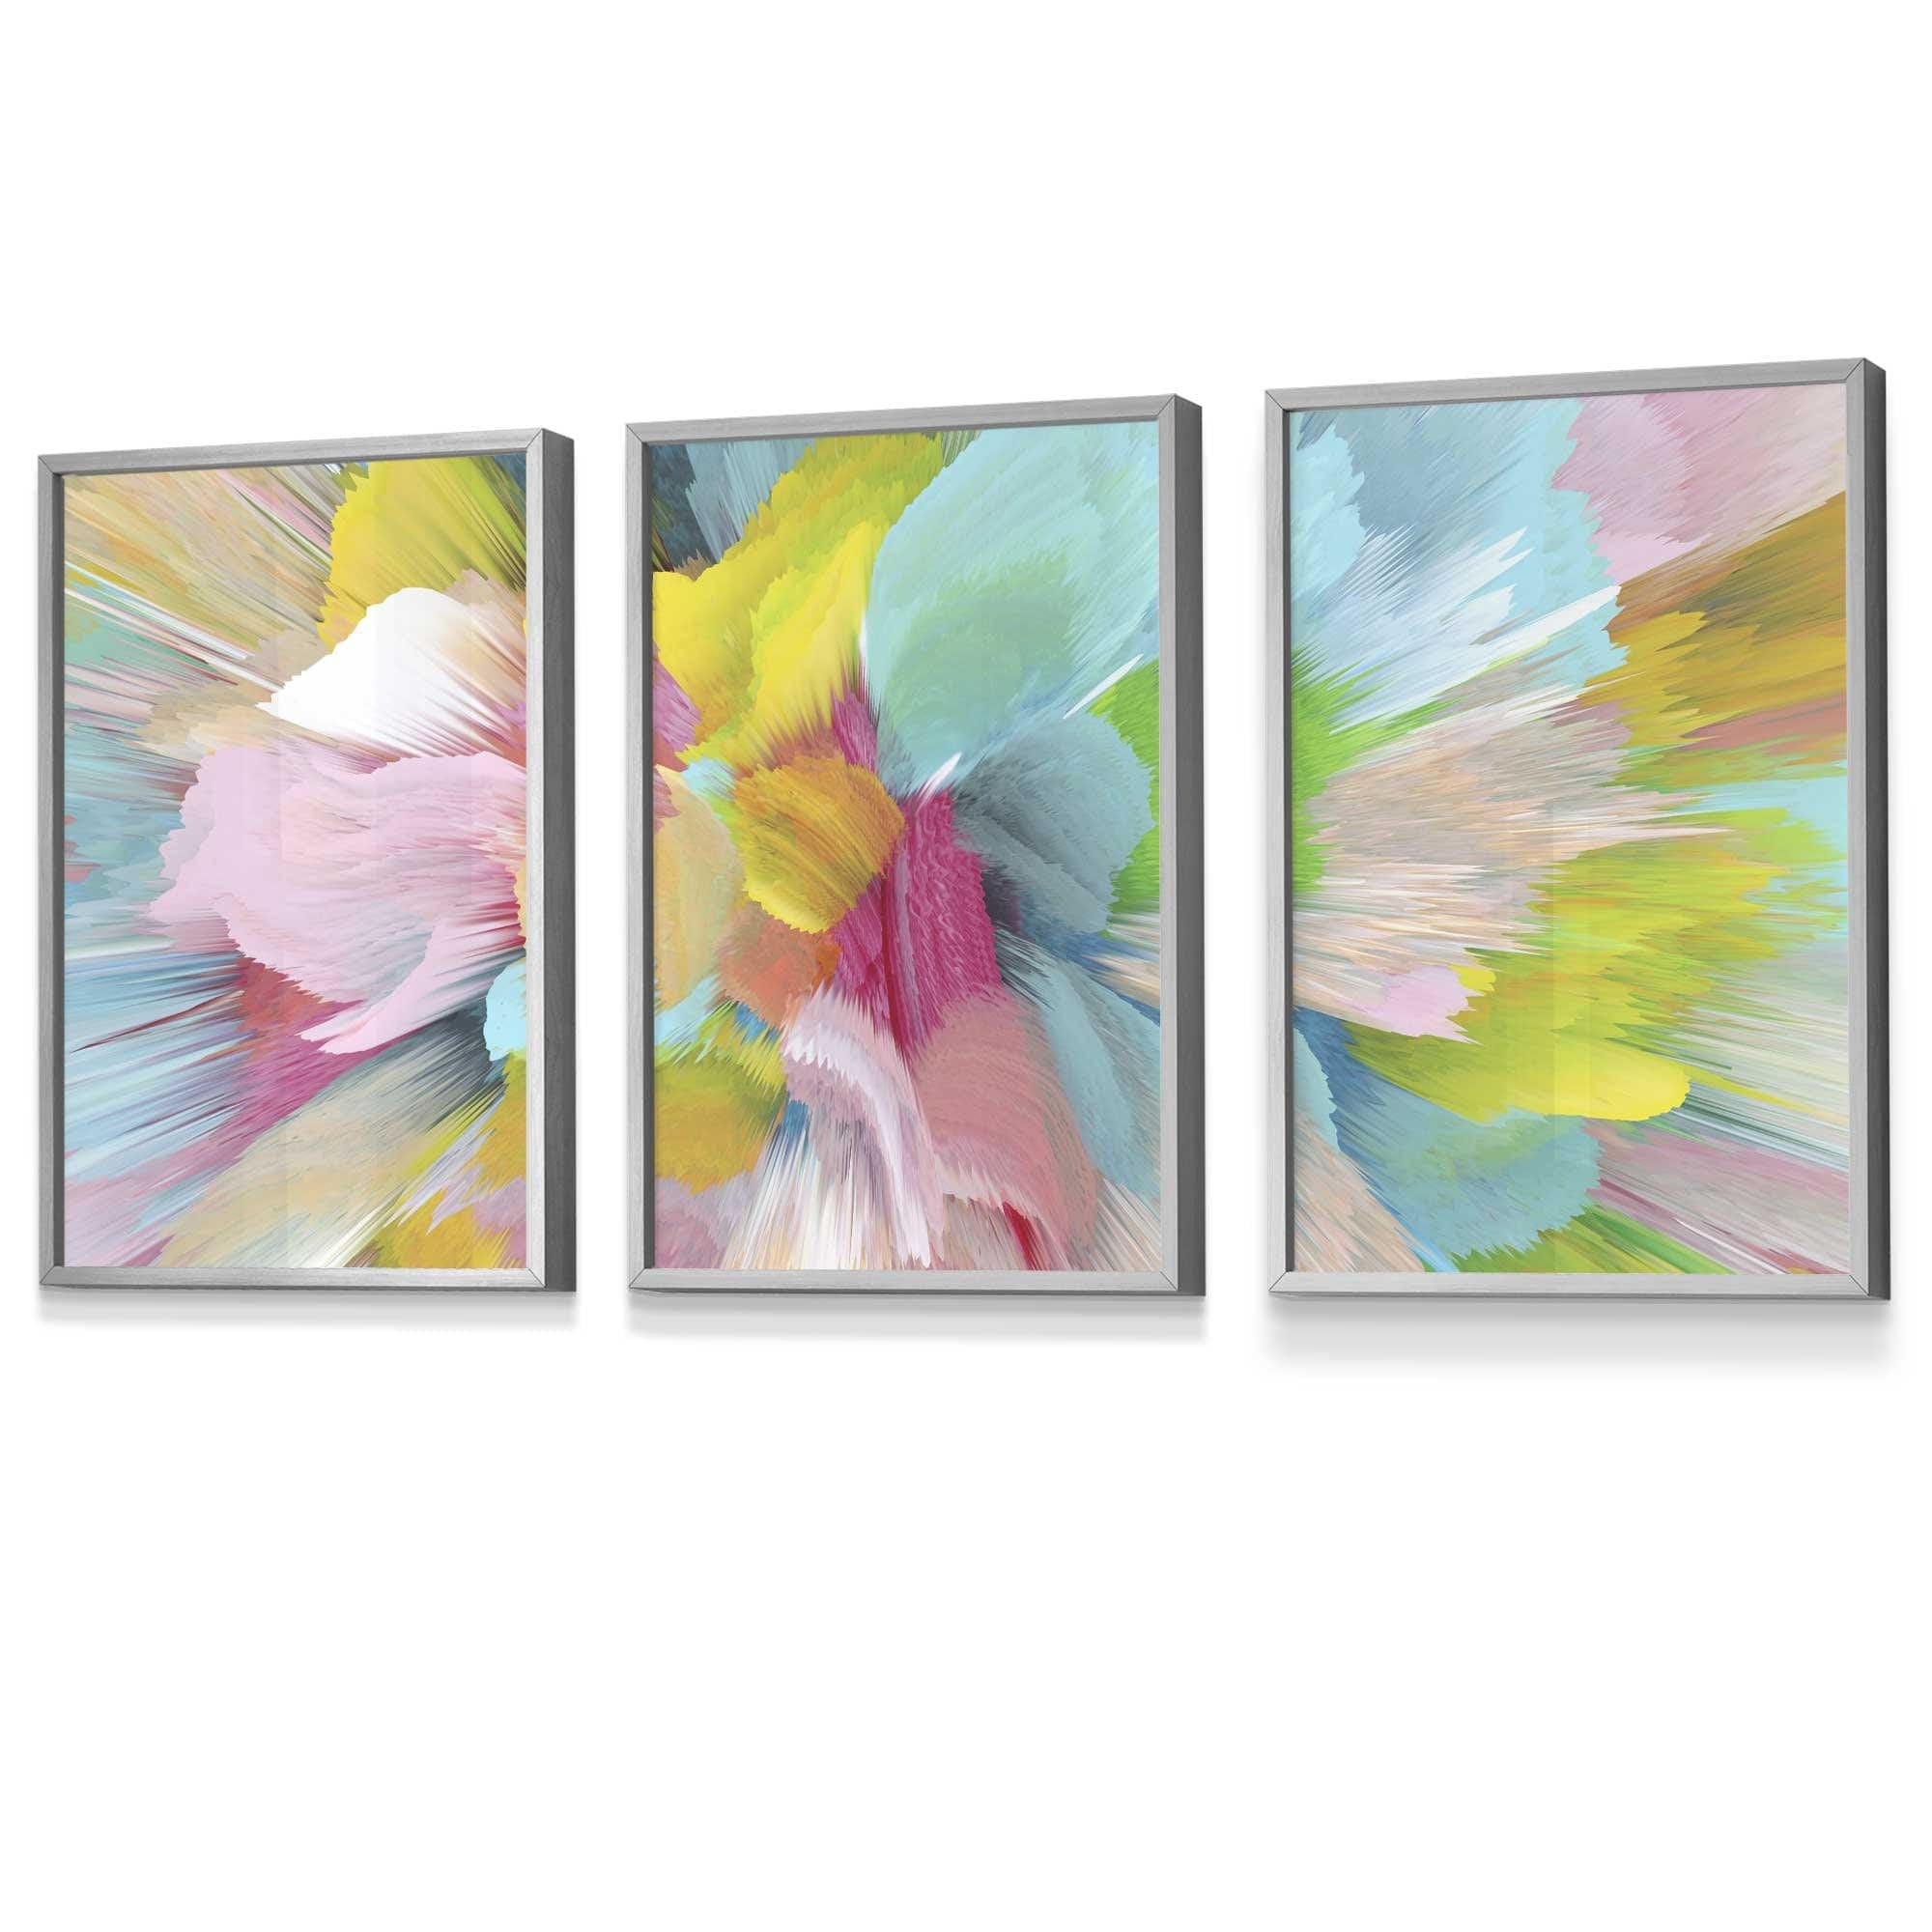 Set of 3 Abstract Bright Painted Fractal Wall Art Prints Framed Colourful Posters Blue Pink Yellow